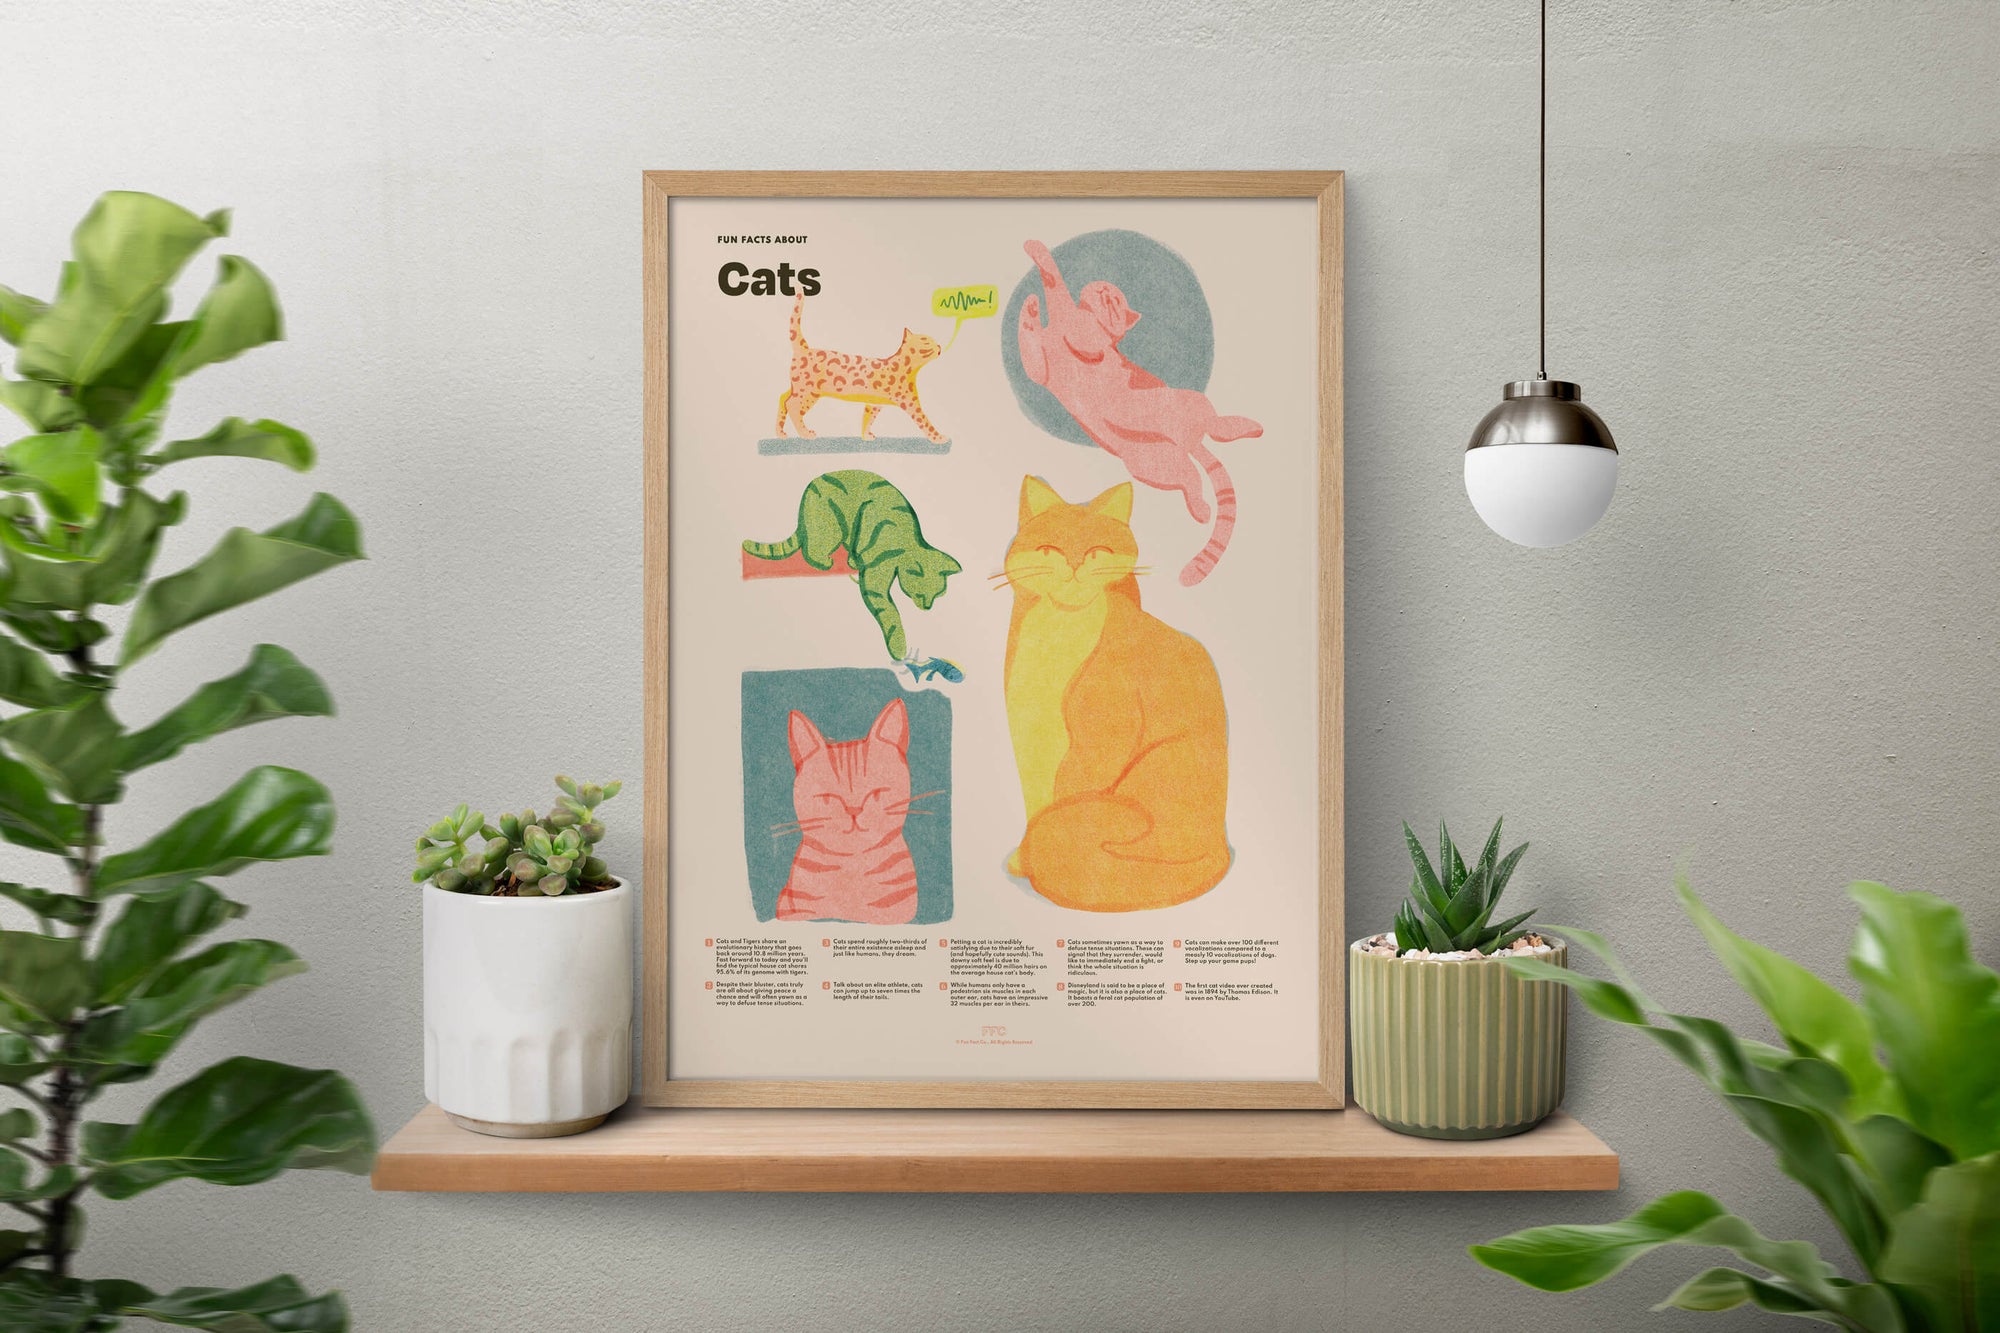 fun facts about cats in a frame in kitchen